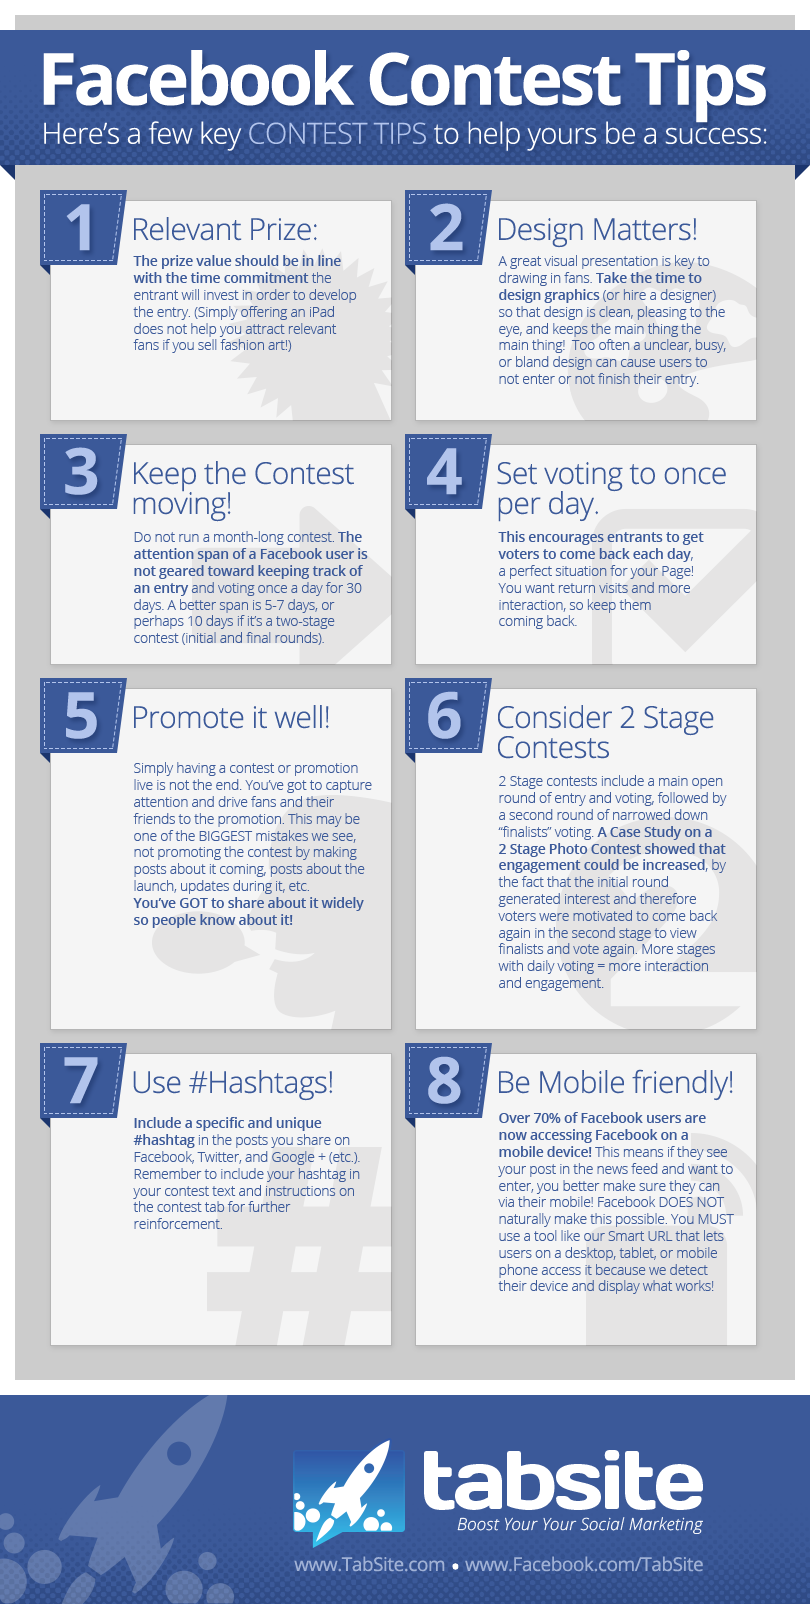 Facebook Contest Success Tips Infographic | Marketing Nutz Digital Social Media Training Consulting Agency